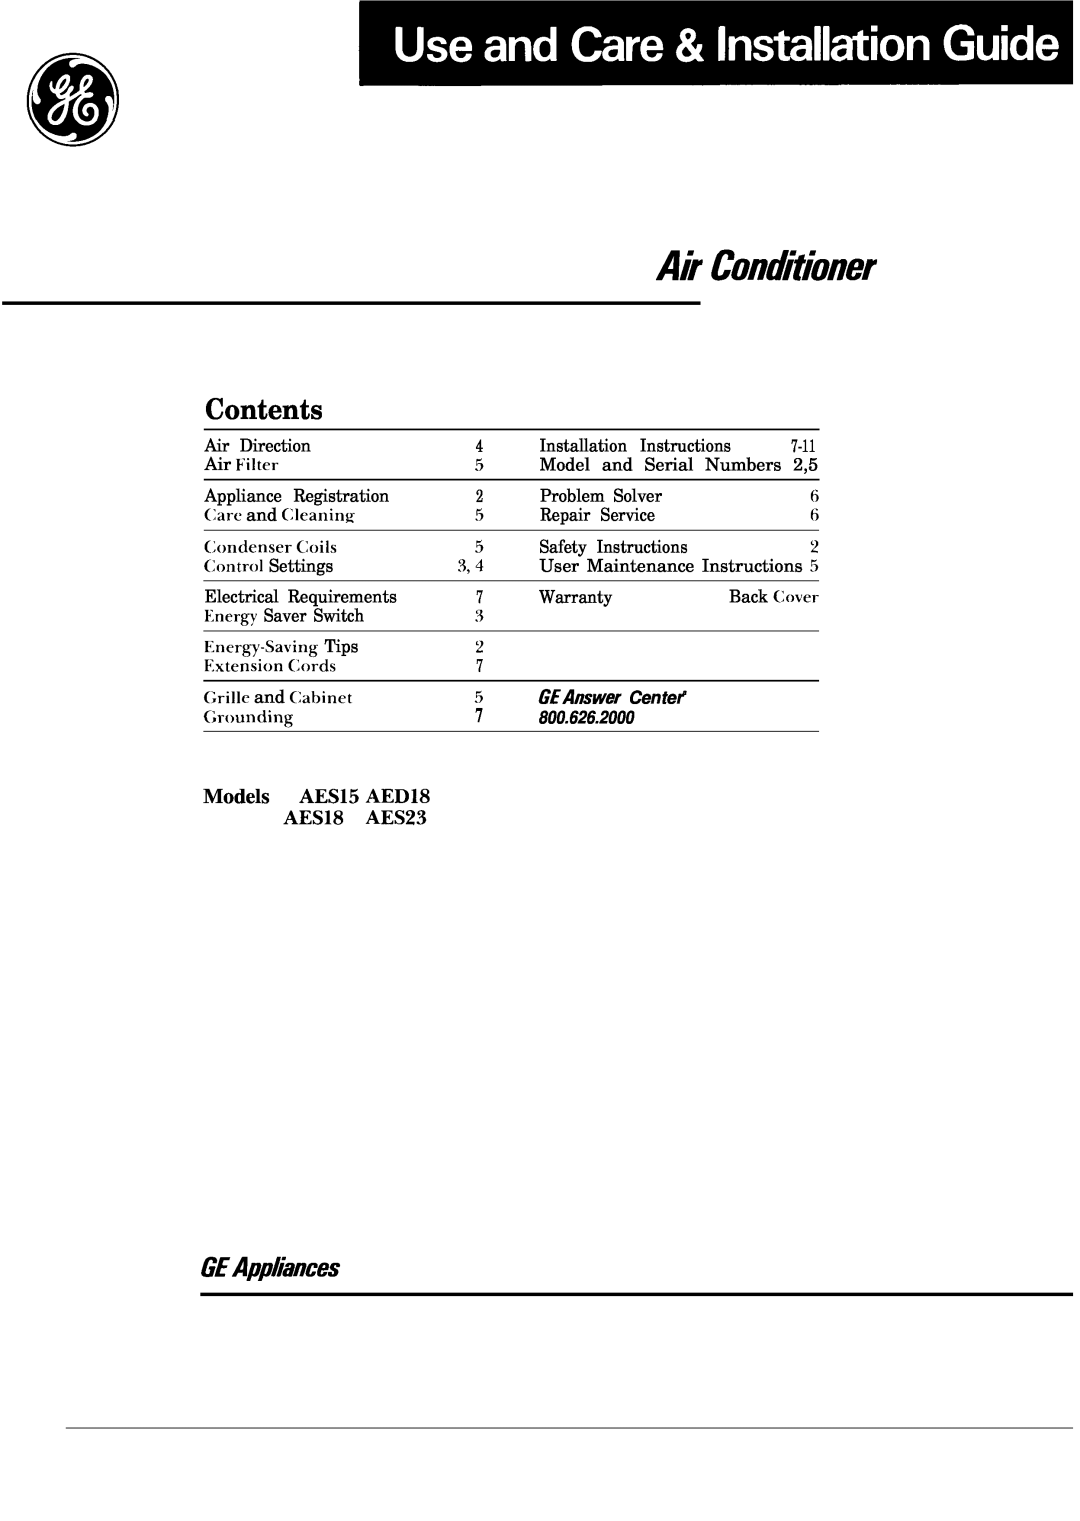 GE installation instructions Contents, GEApp#ances, Models, AES15 AED18, AES18 AES23, Ak ContiYioner, GEAnswer Centera 